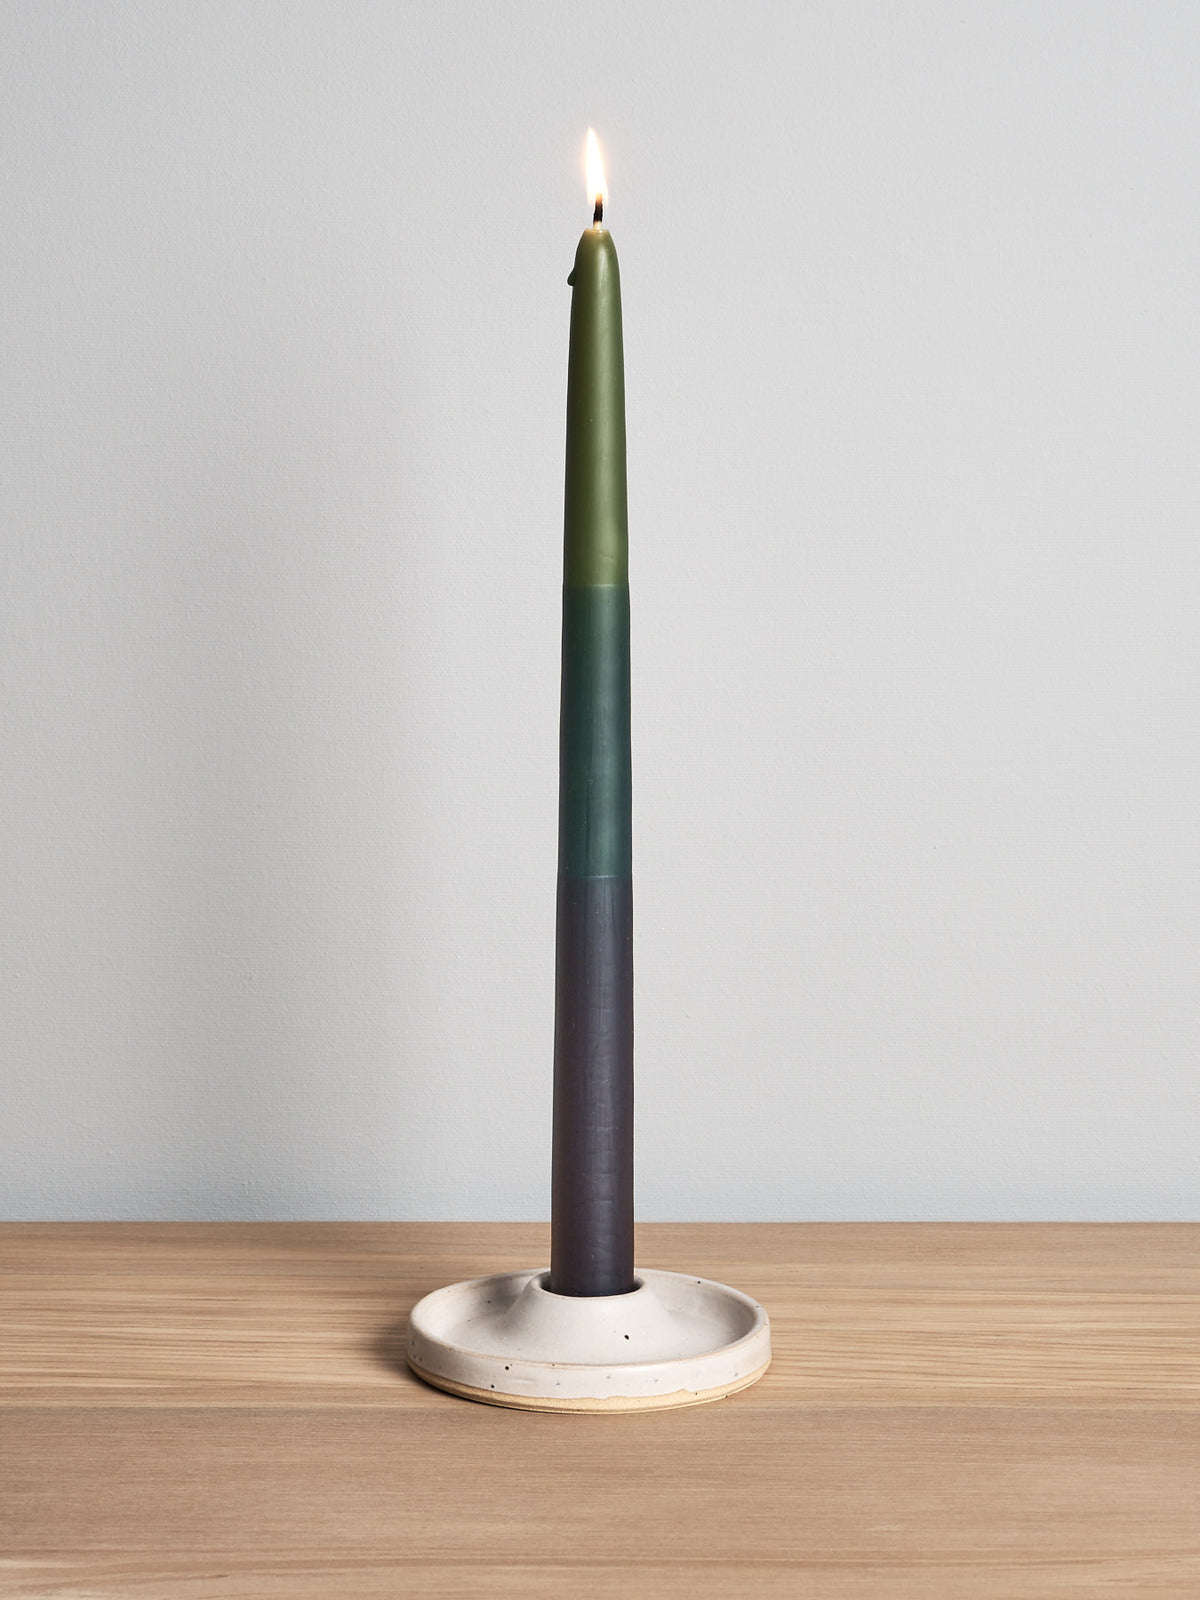 A Candle Holder – Cloud sitting on top of a wooden table by deborah sweeney.